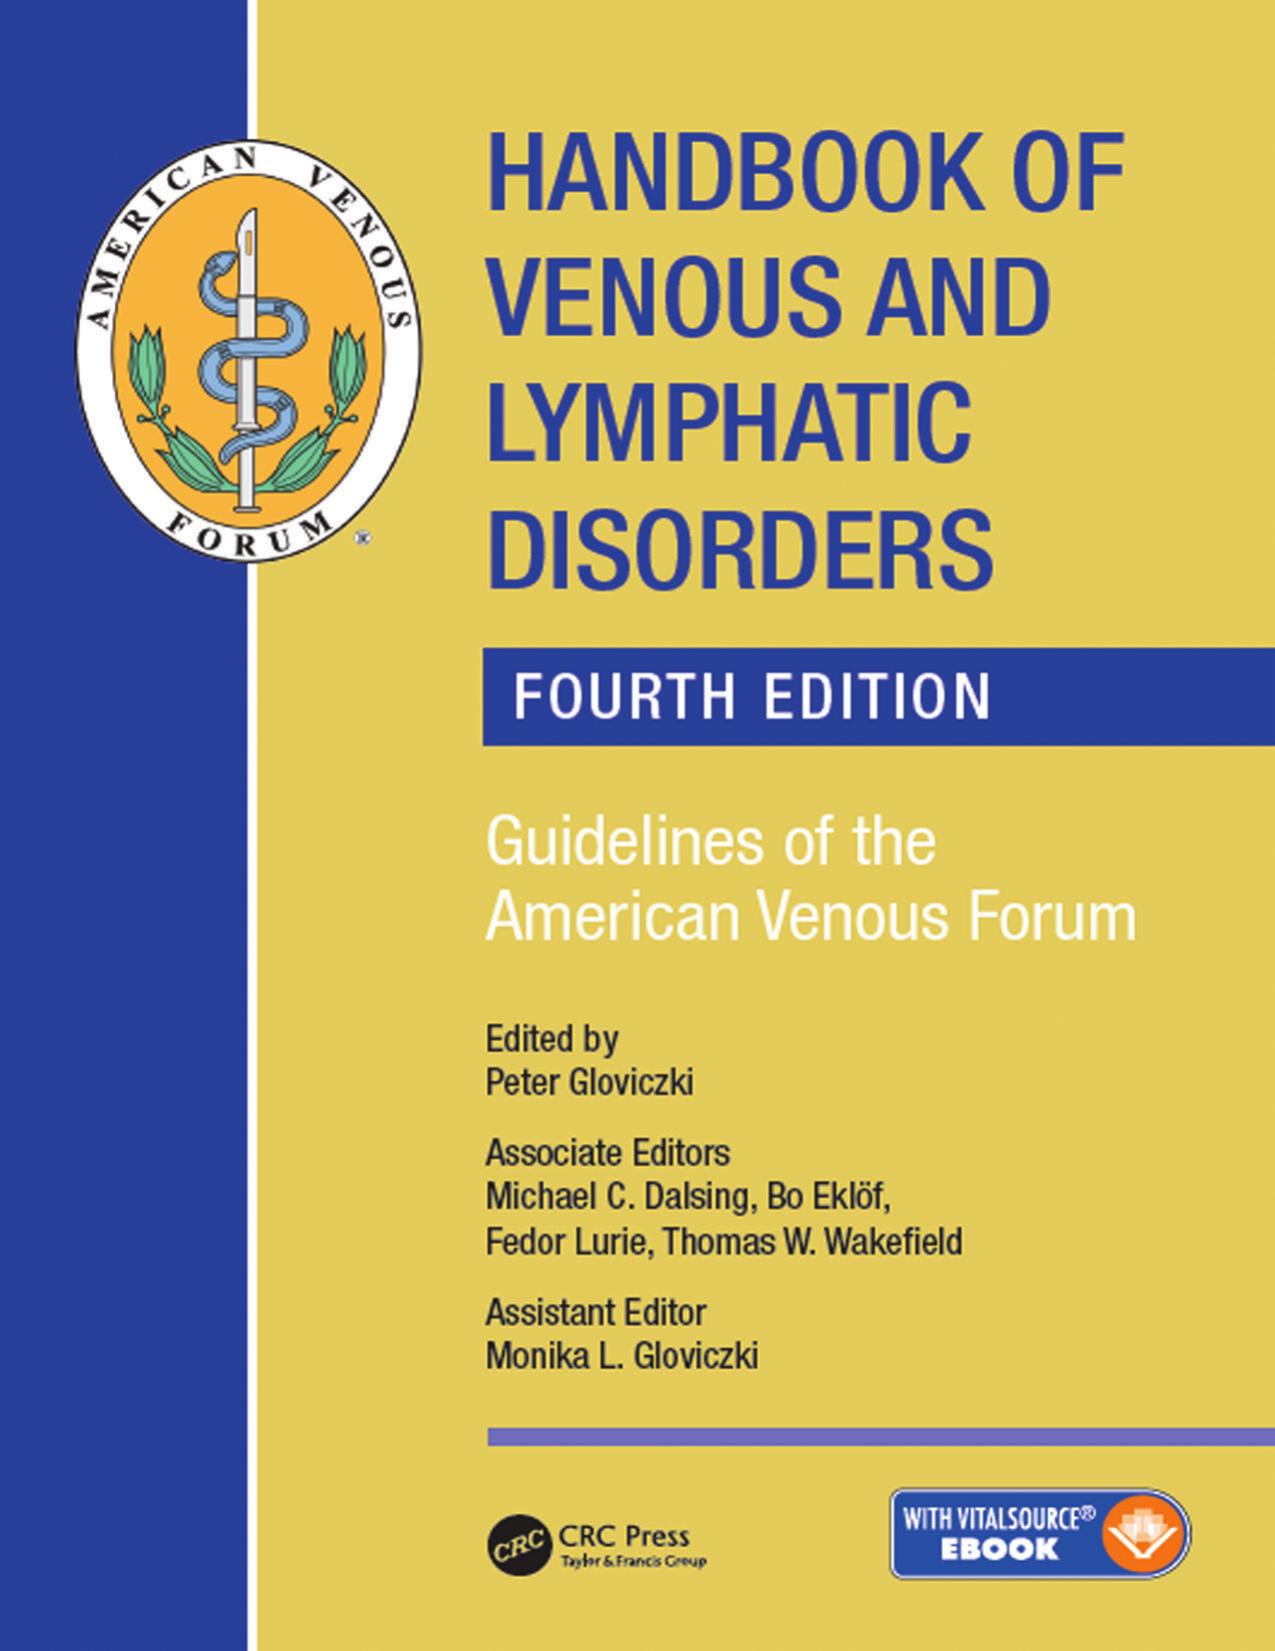 Handbook of Venous and Lymphatic Disorders Guidelines of the American